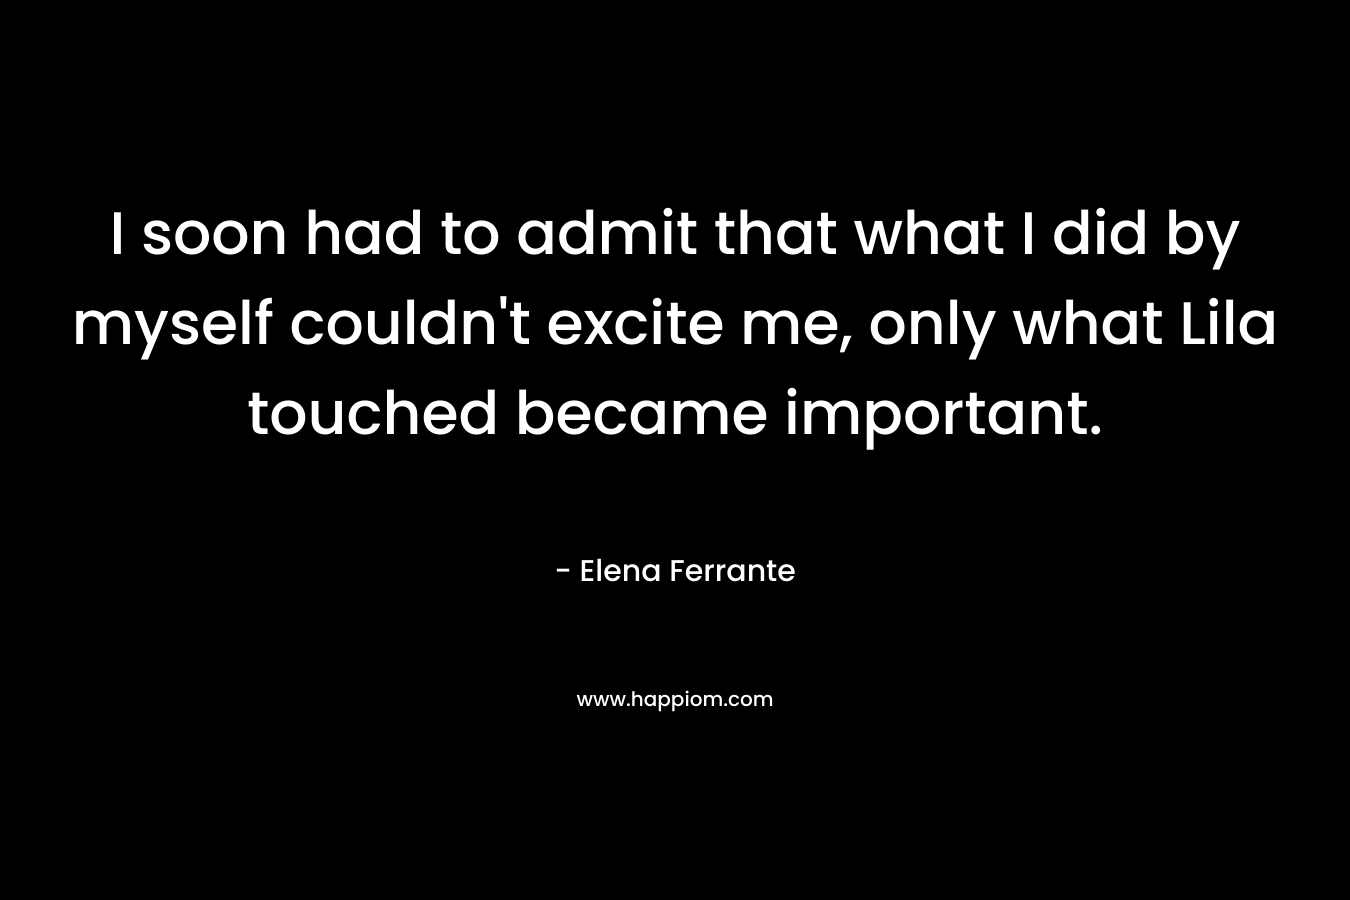 I soon had to admit that what I did by myself couldn’t excite me, only what Lila touched became important. – Elena Ferrante